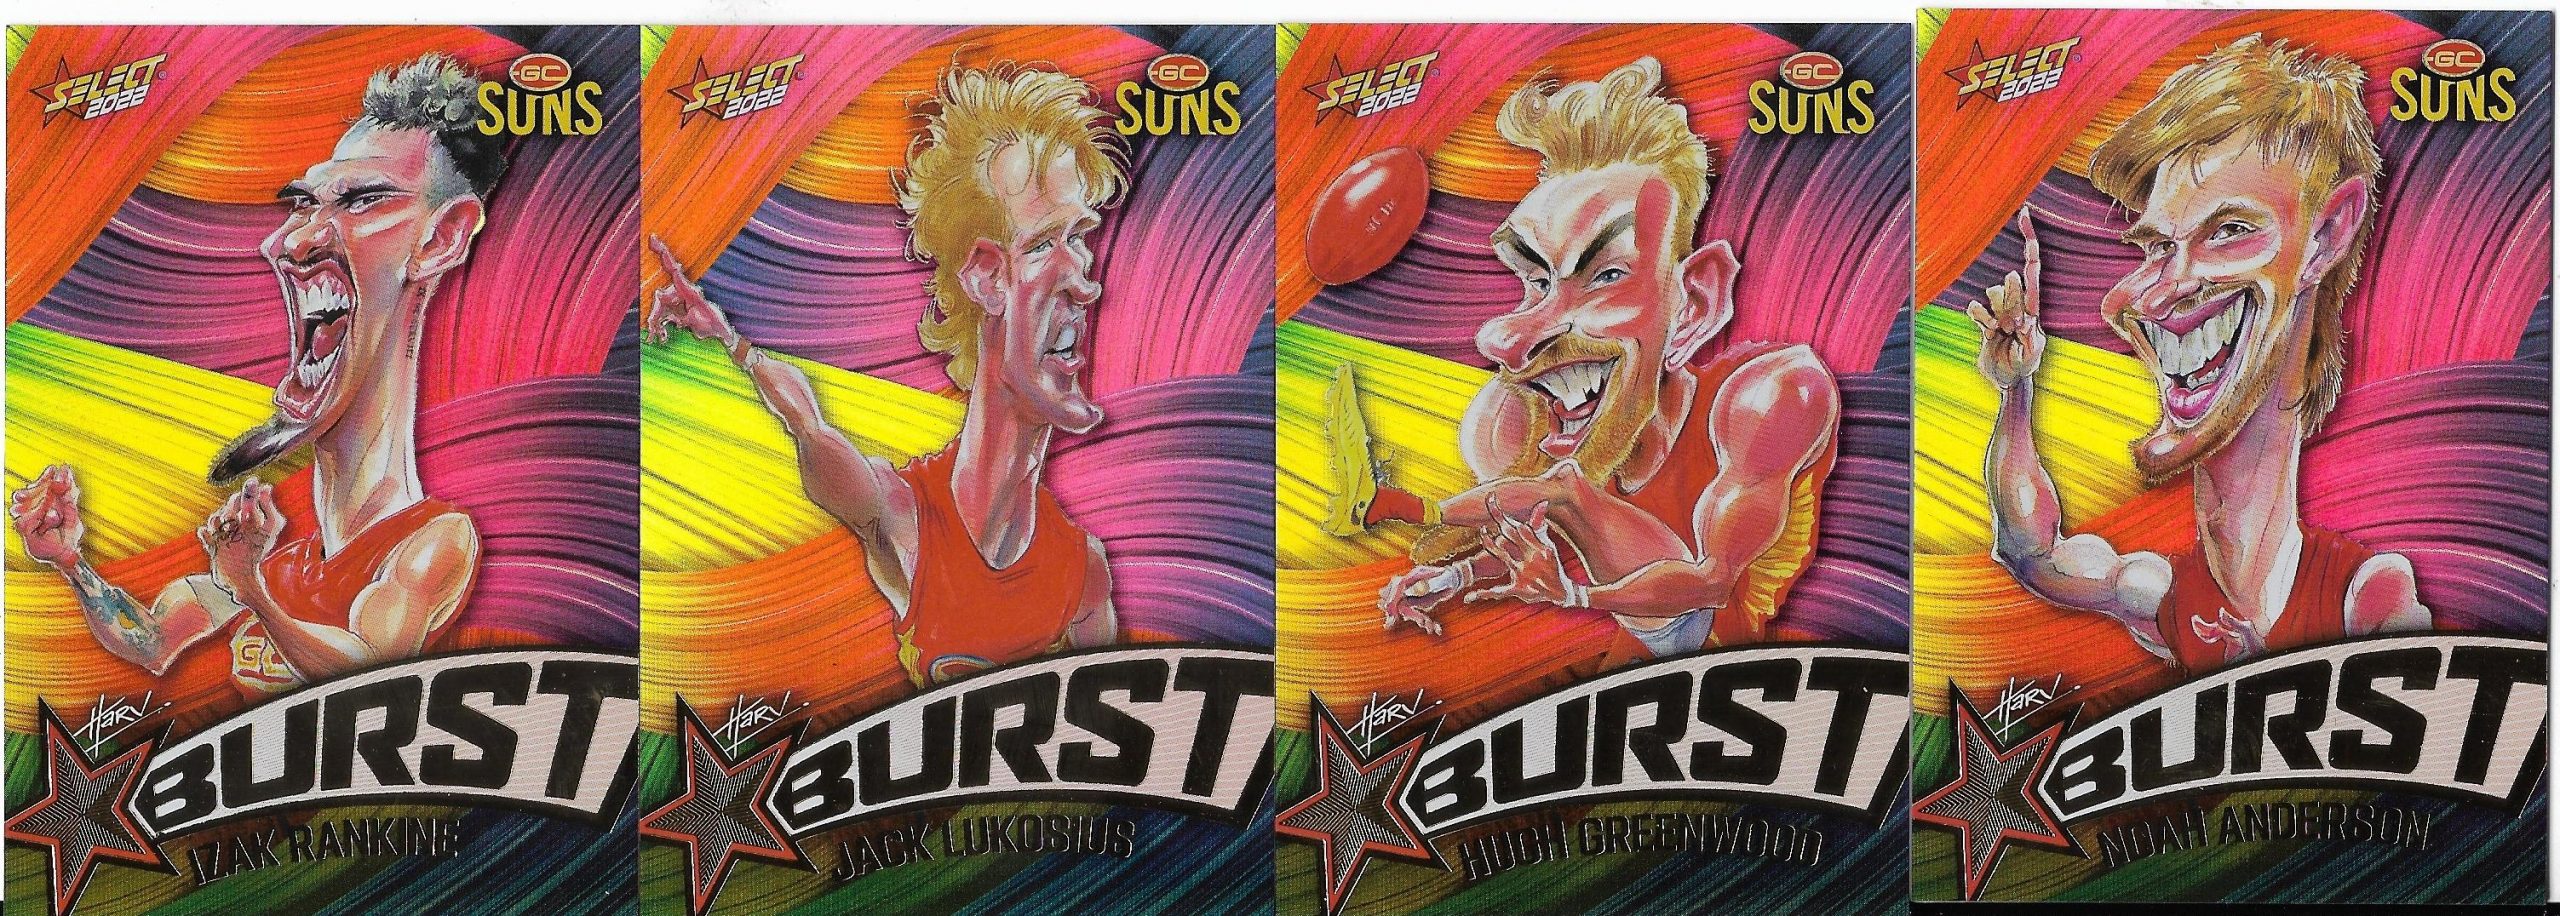 2022 Select Footy Stars Starburst Caricature – Paint Set Of 4 – Gold Coast